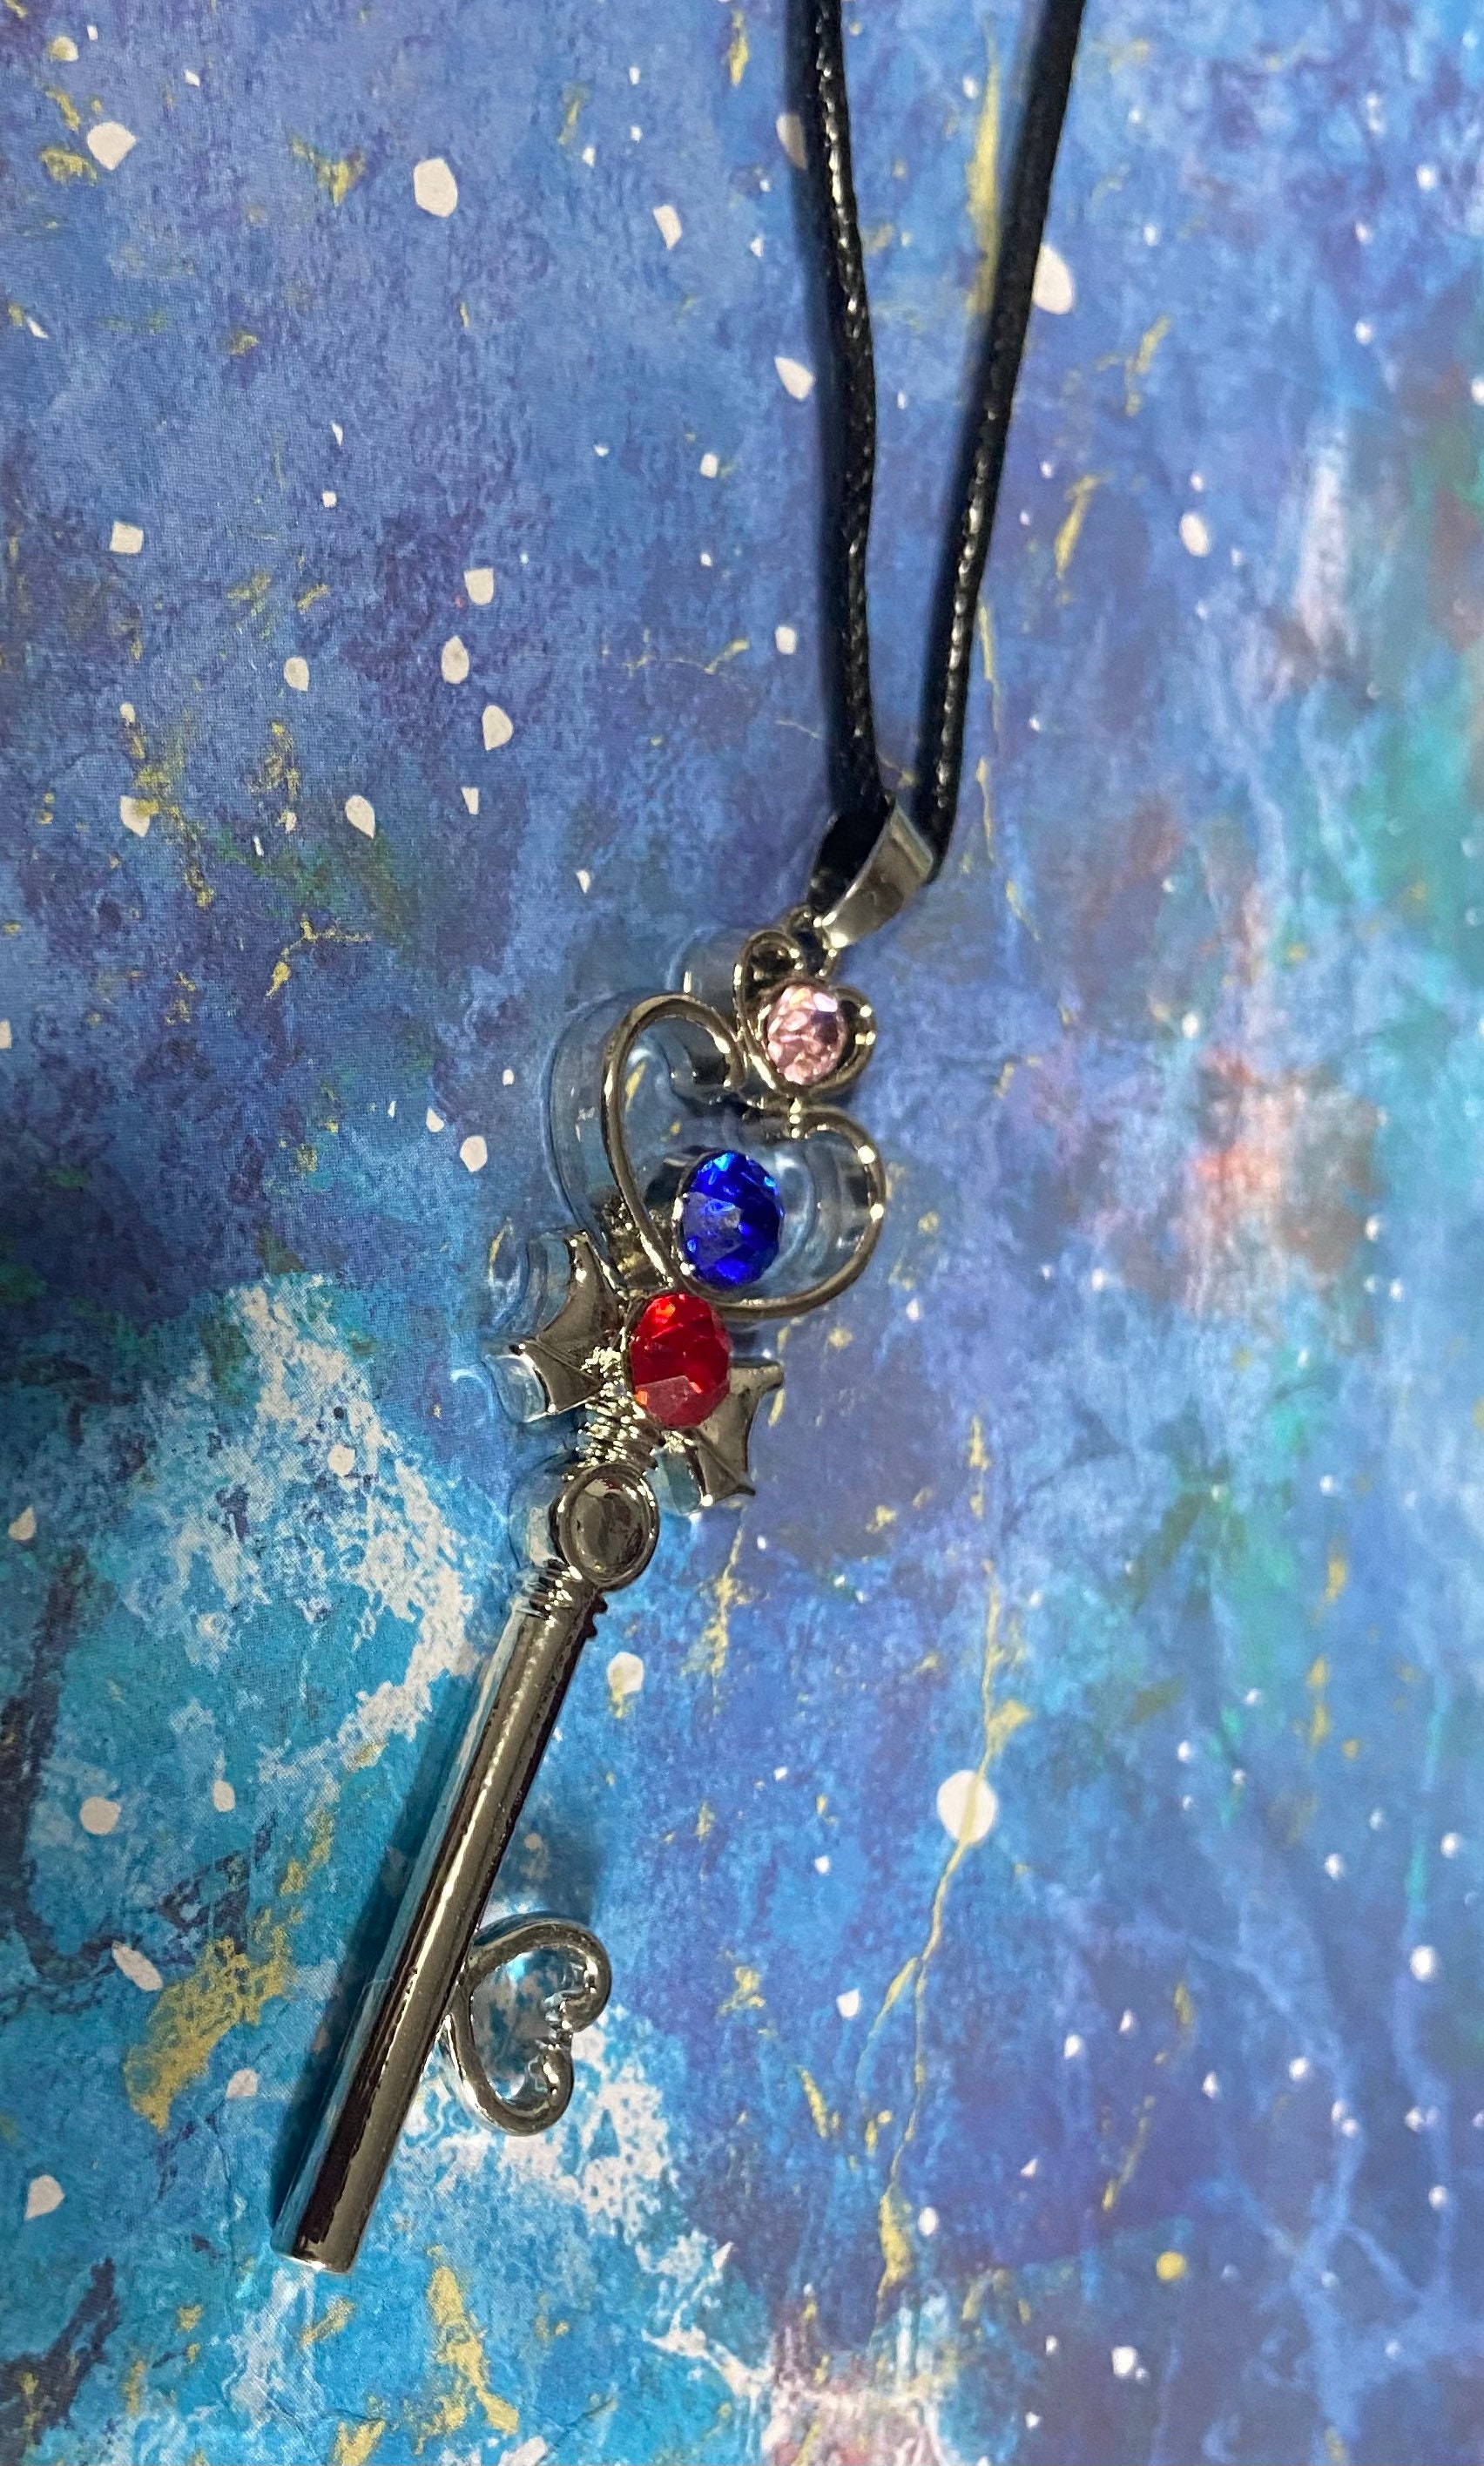 Skeleton Key Necklace Fluttering Oasis - Butterfly Key to My Heart Crystal Pendant, Statement Fairy Jewelry Fairycore Fantasy Witchy Gift